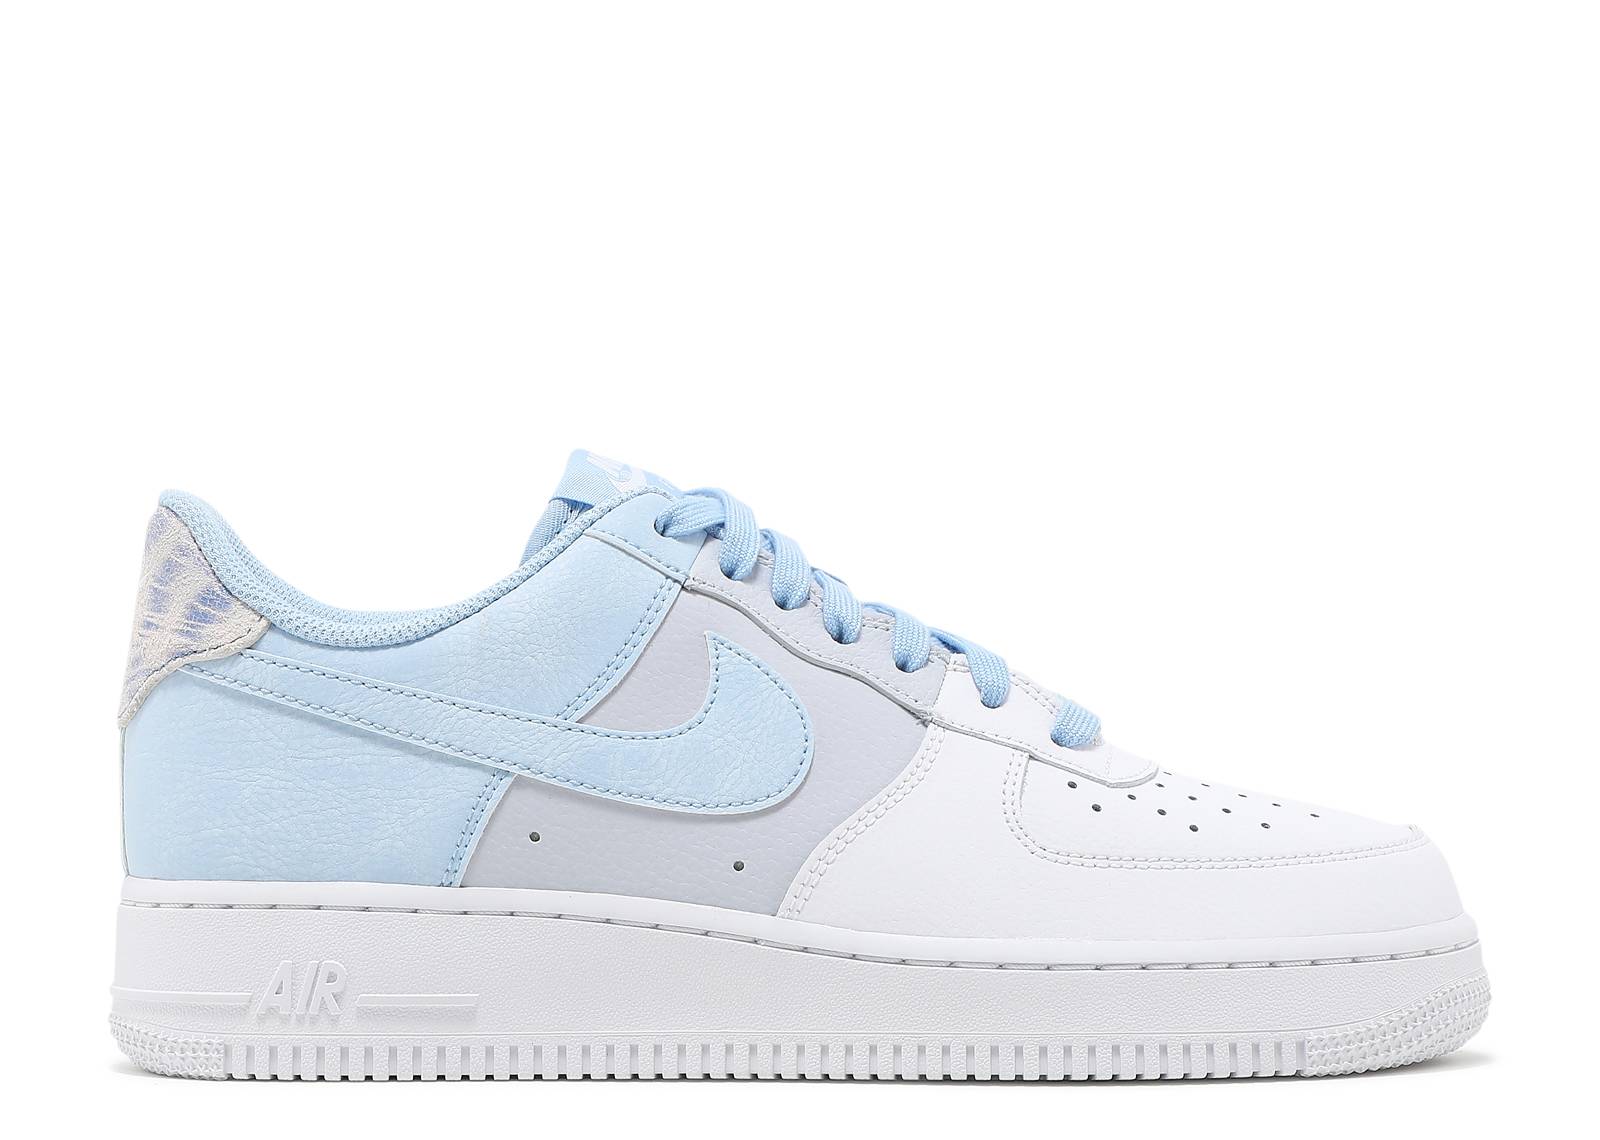 Air Force 1 '07 LV8 'Psychic Blue'